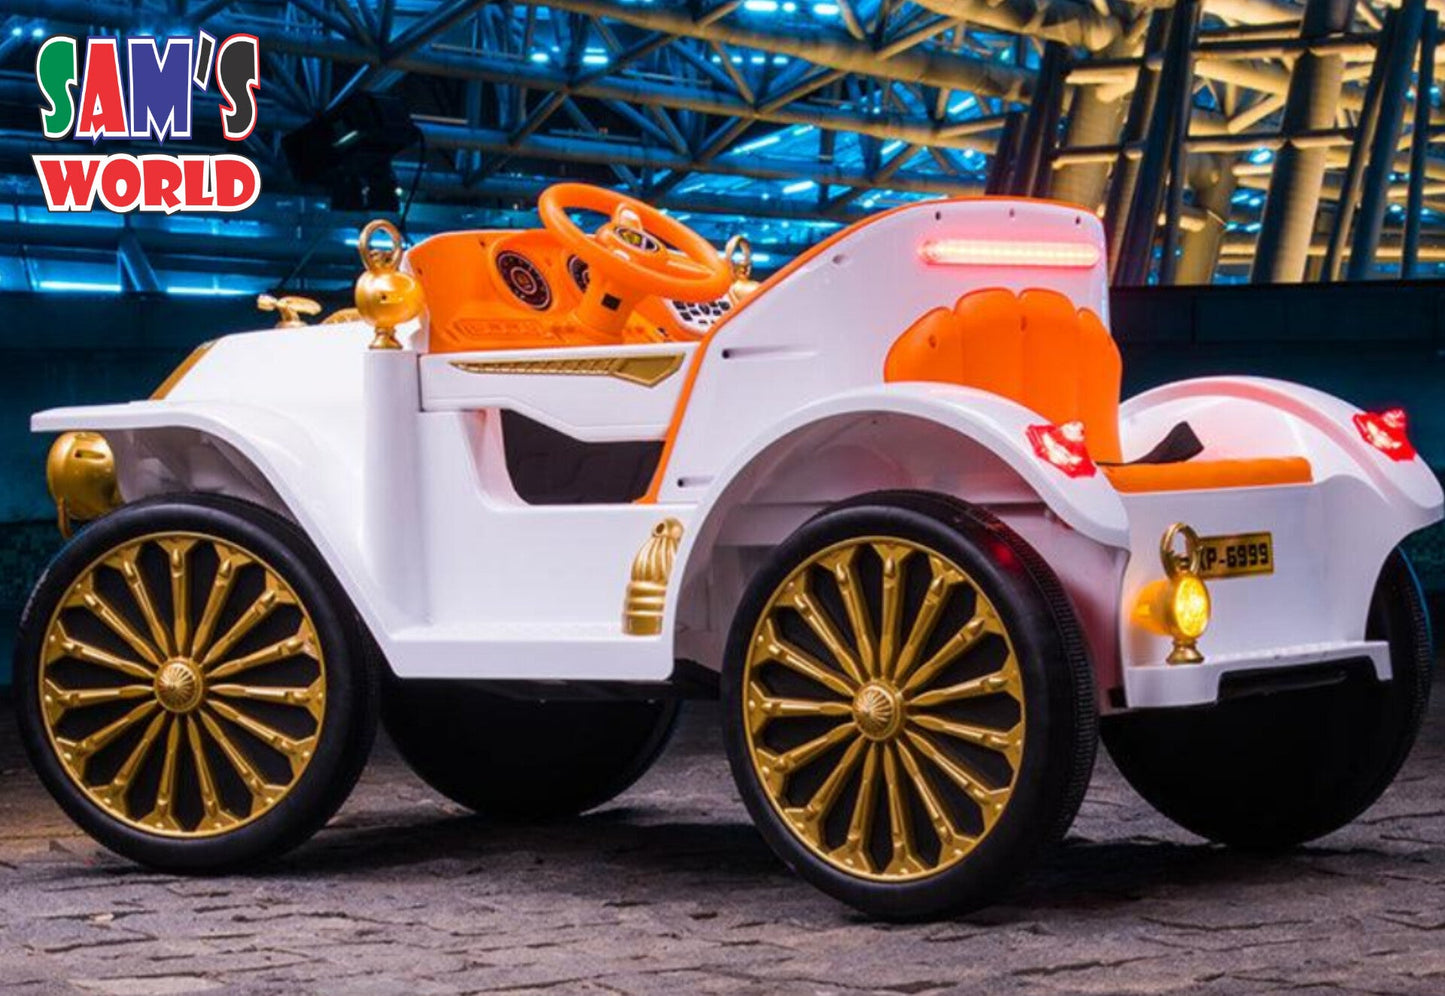 Mercedes Simplex Style Vintage jumbo size 12 volt Kids Car | 4X4 Wheel Drive | Leather Seat| Battery Operated ride on car samstoy.in Sams toy world Ahmedabad 